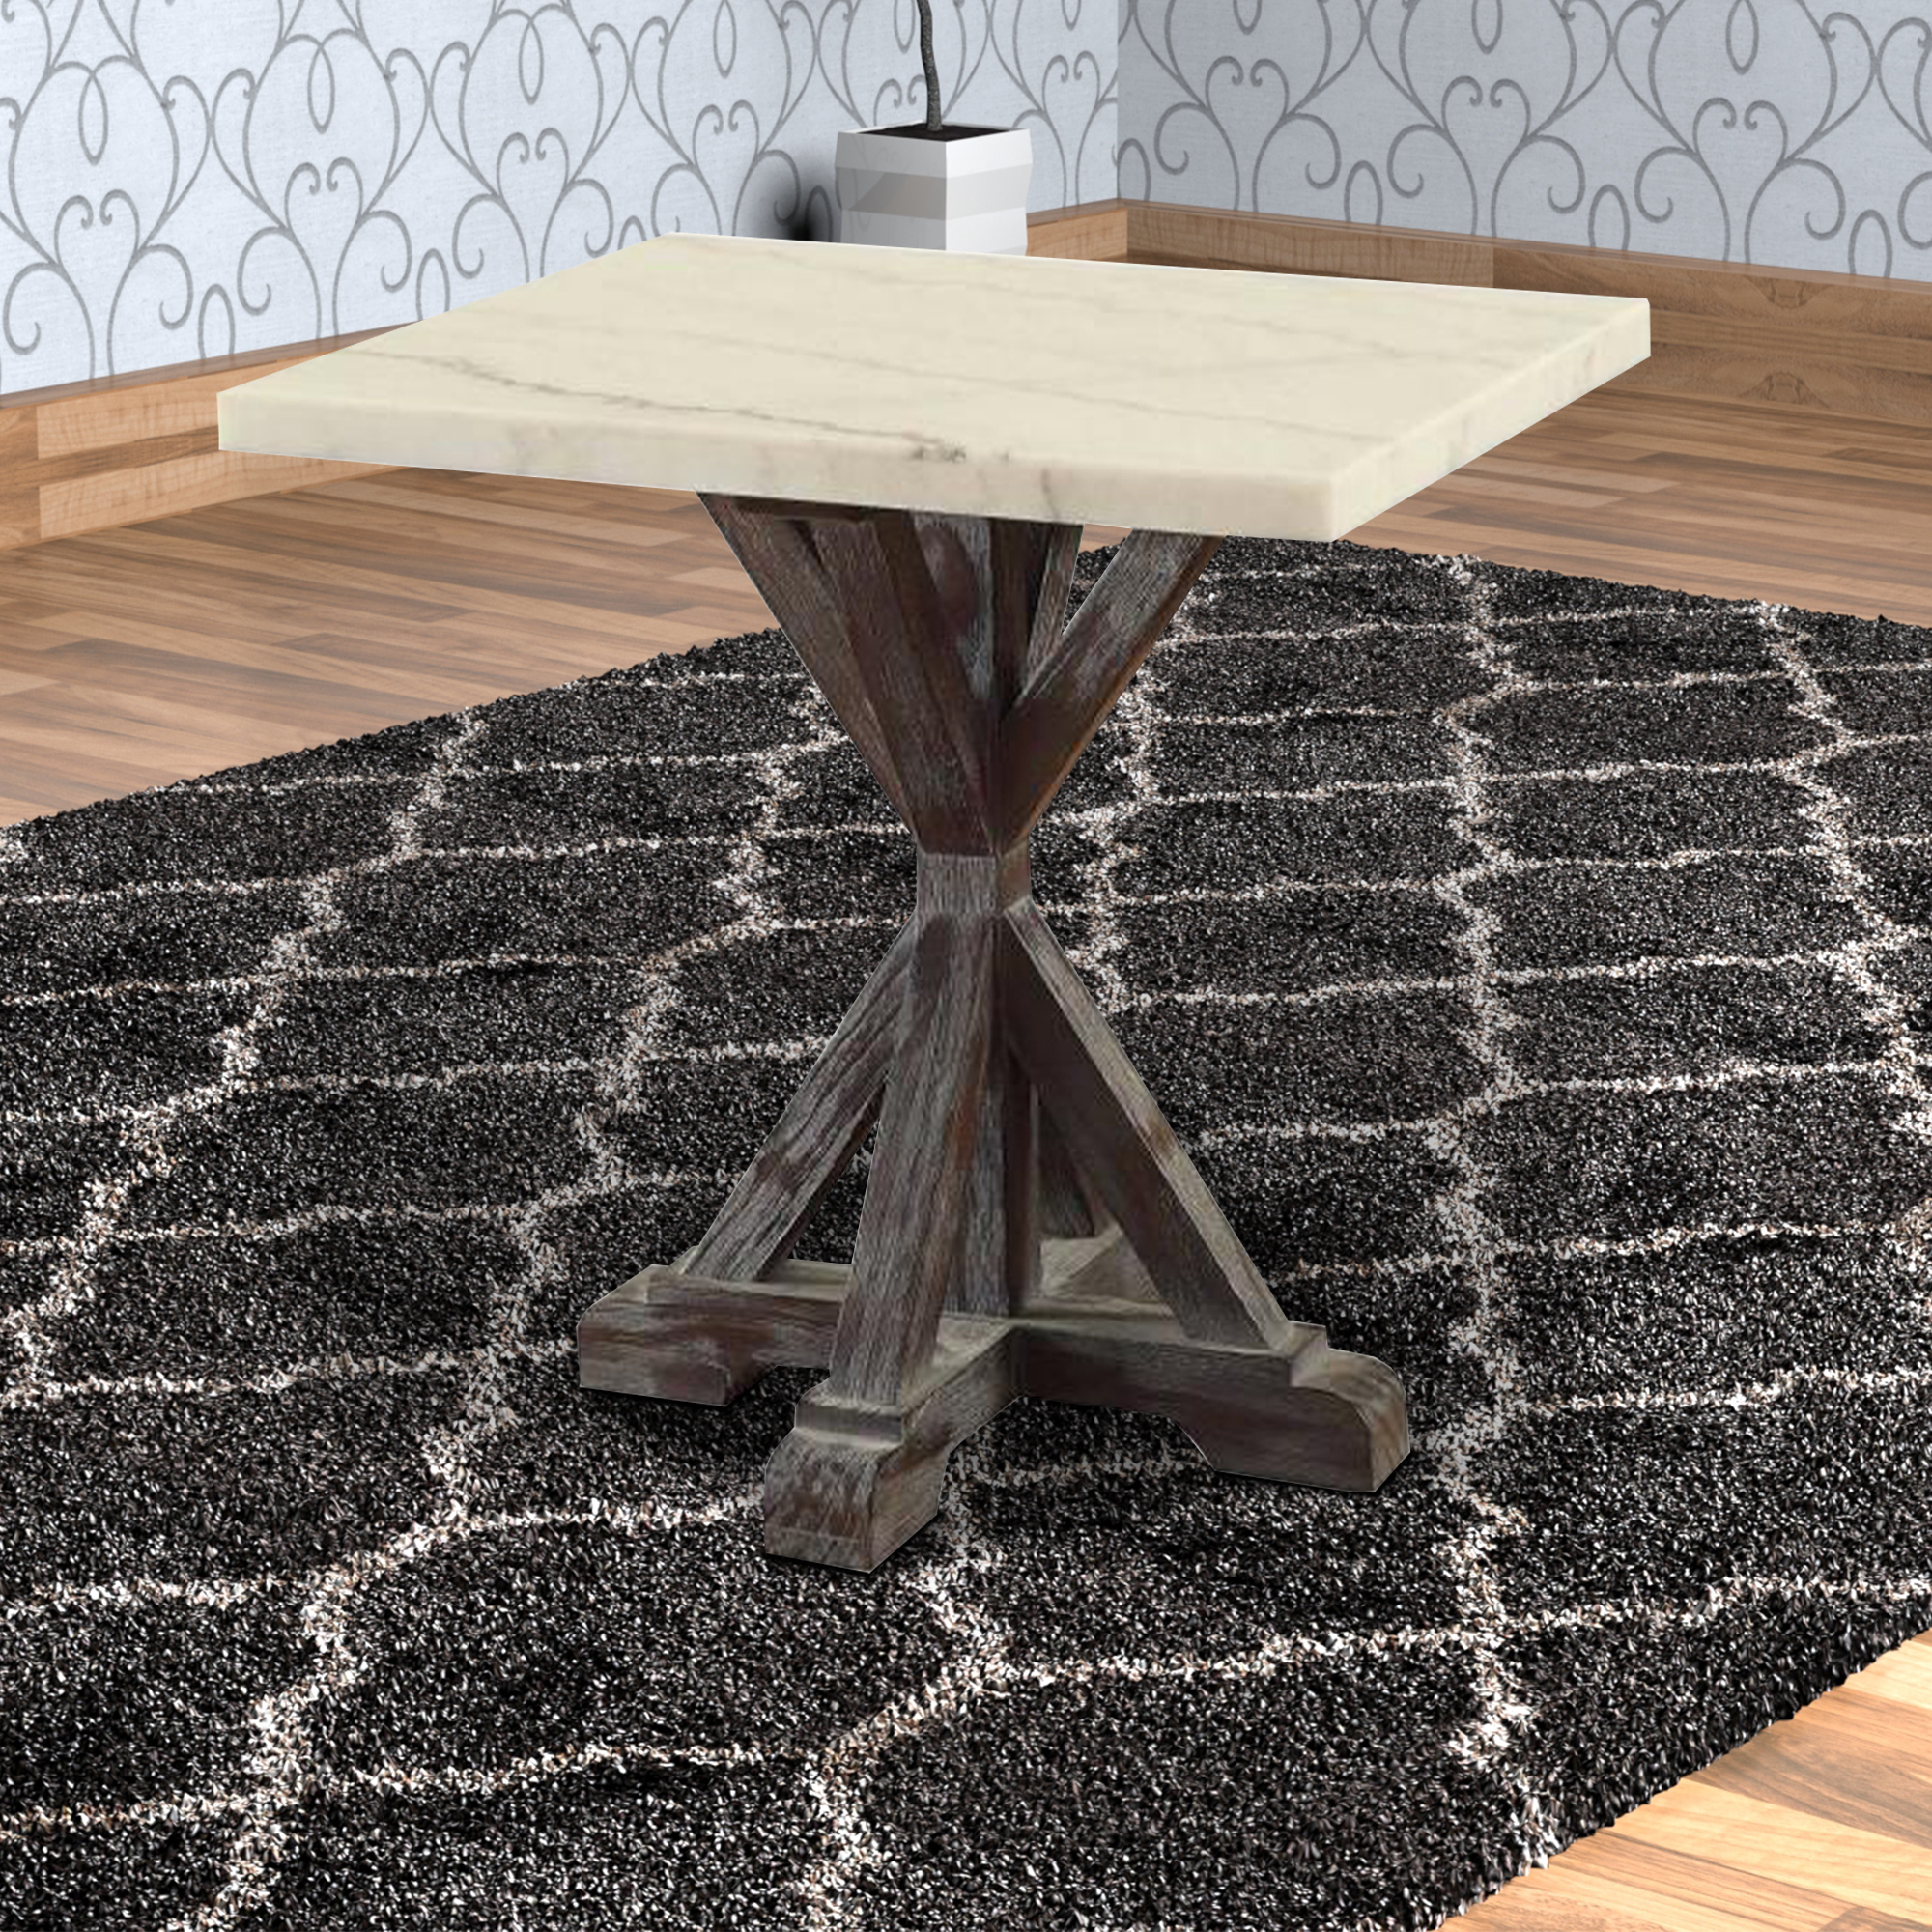 Marble Top End Table With Wooden Tri Pod Base, White And Espresso Brown- Saltoro Sherpi